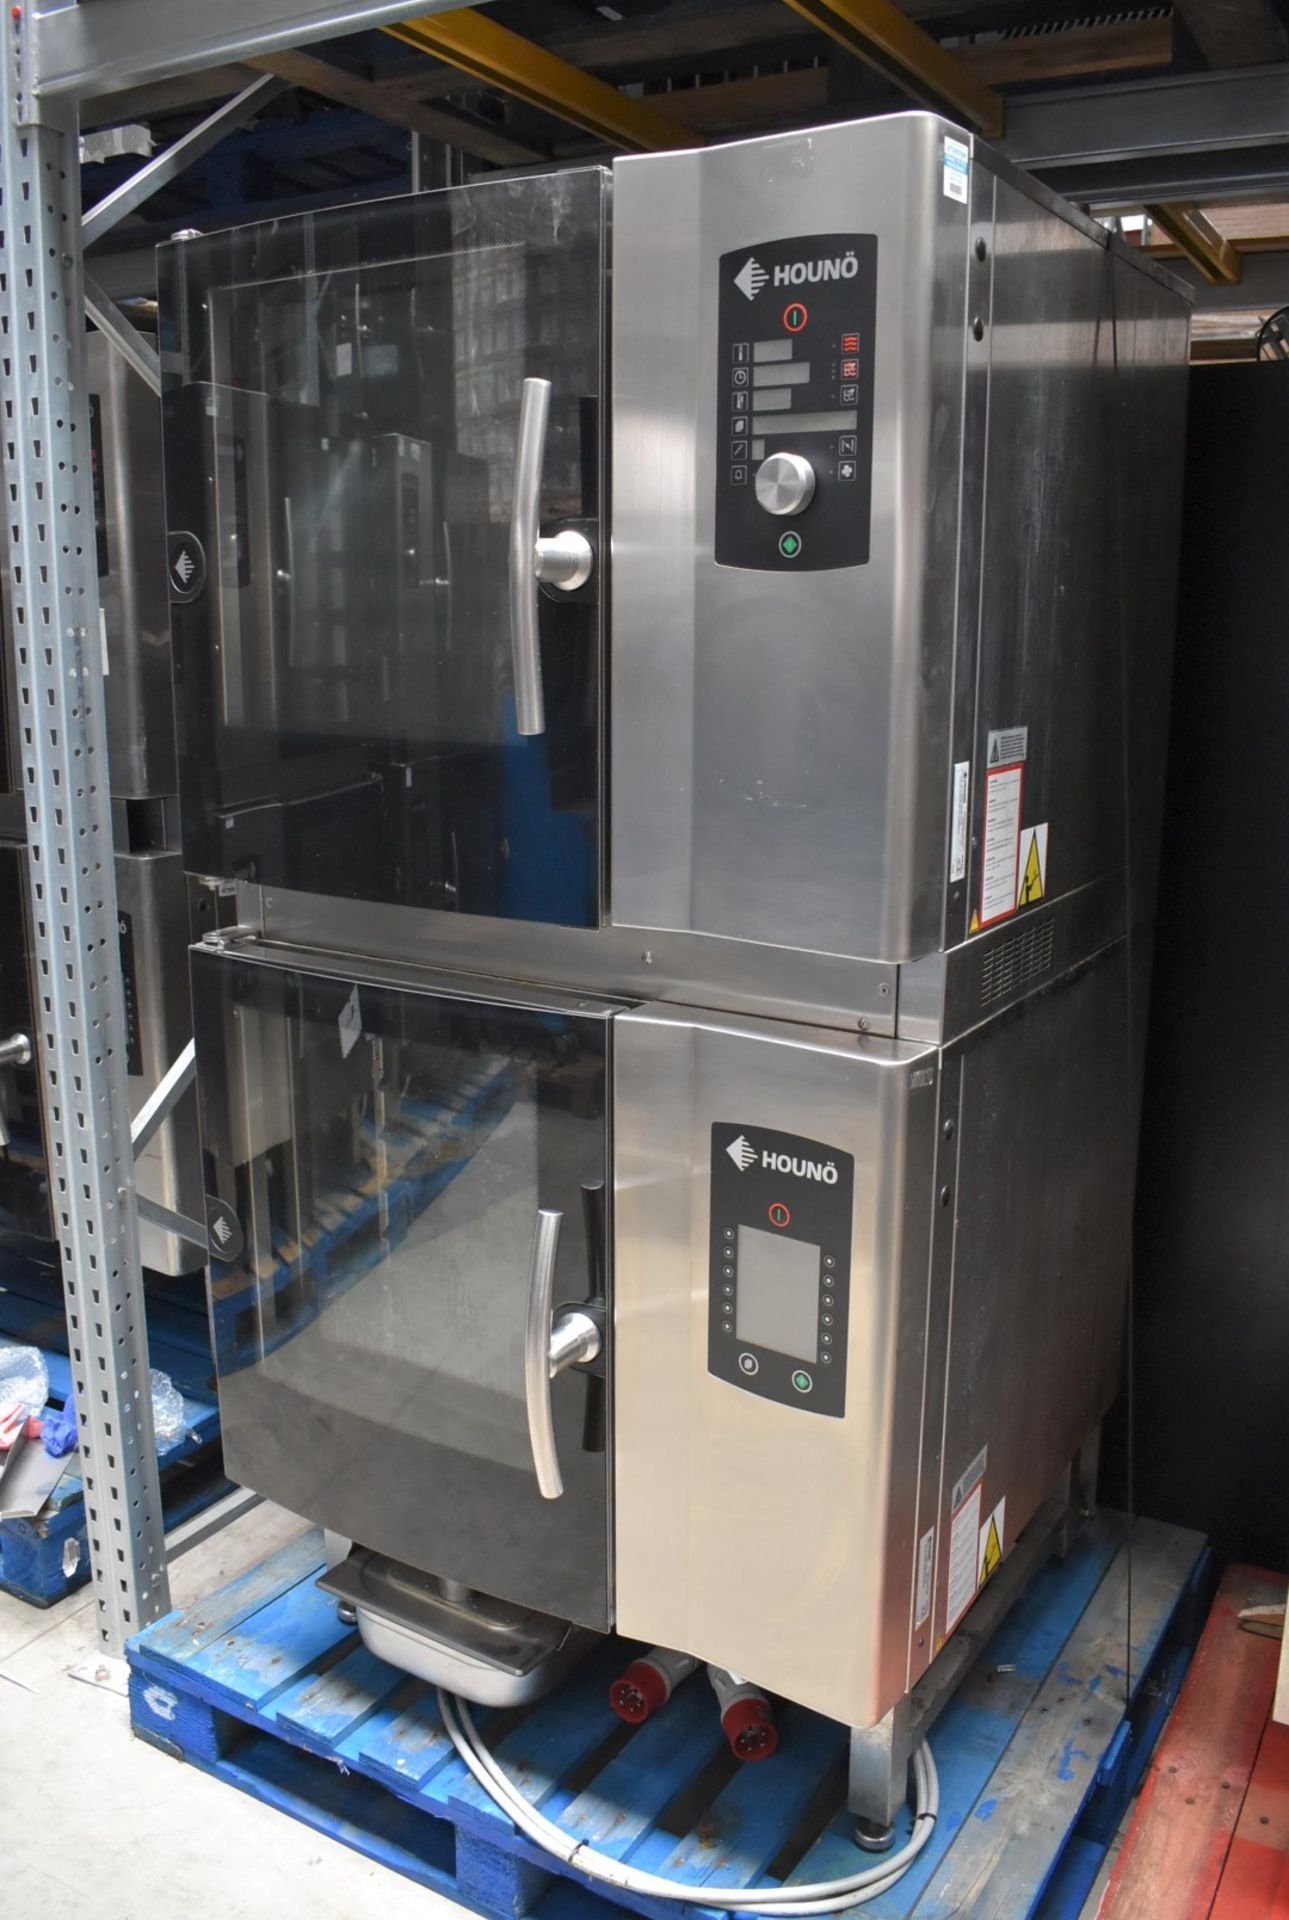 1 x Houno Double 6 Grid Stacked Combi Oven - Model: C 1.06 / CPE 1.06 - 3 Phase - Image 6 of 21